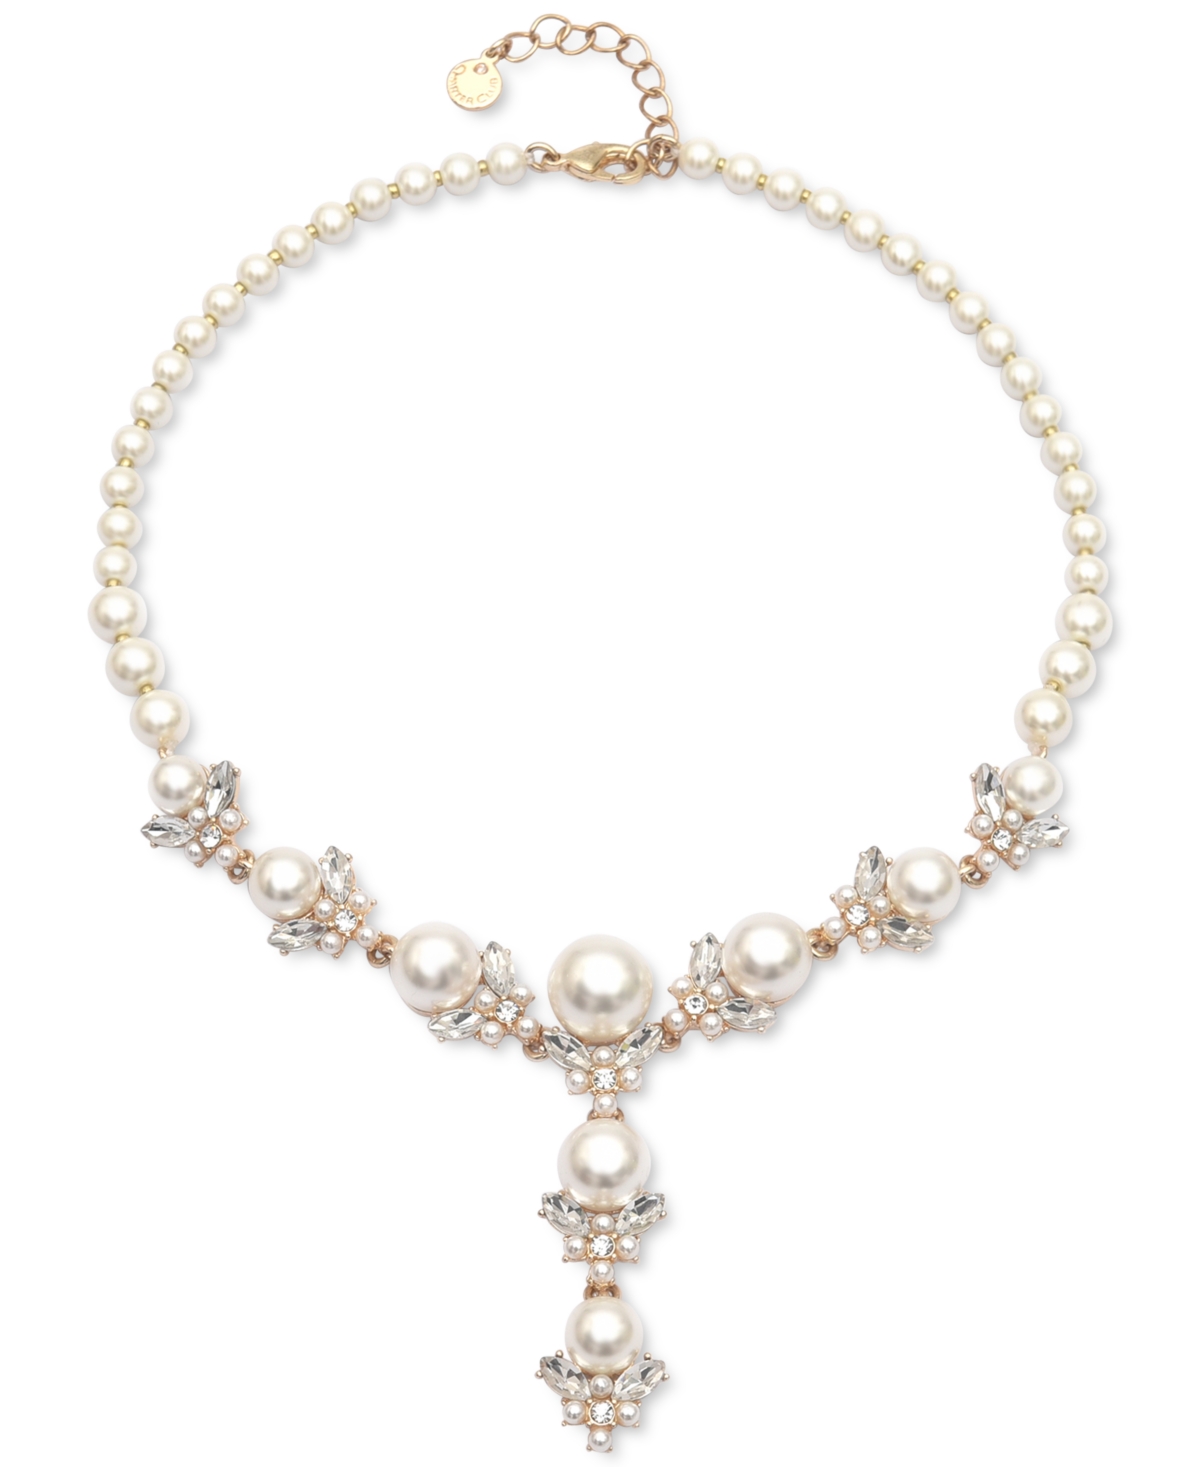 Charter Club Gold-Tone Crystal & Imitation Pearl Lariat Necklace, 17